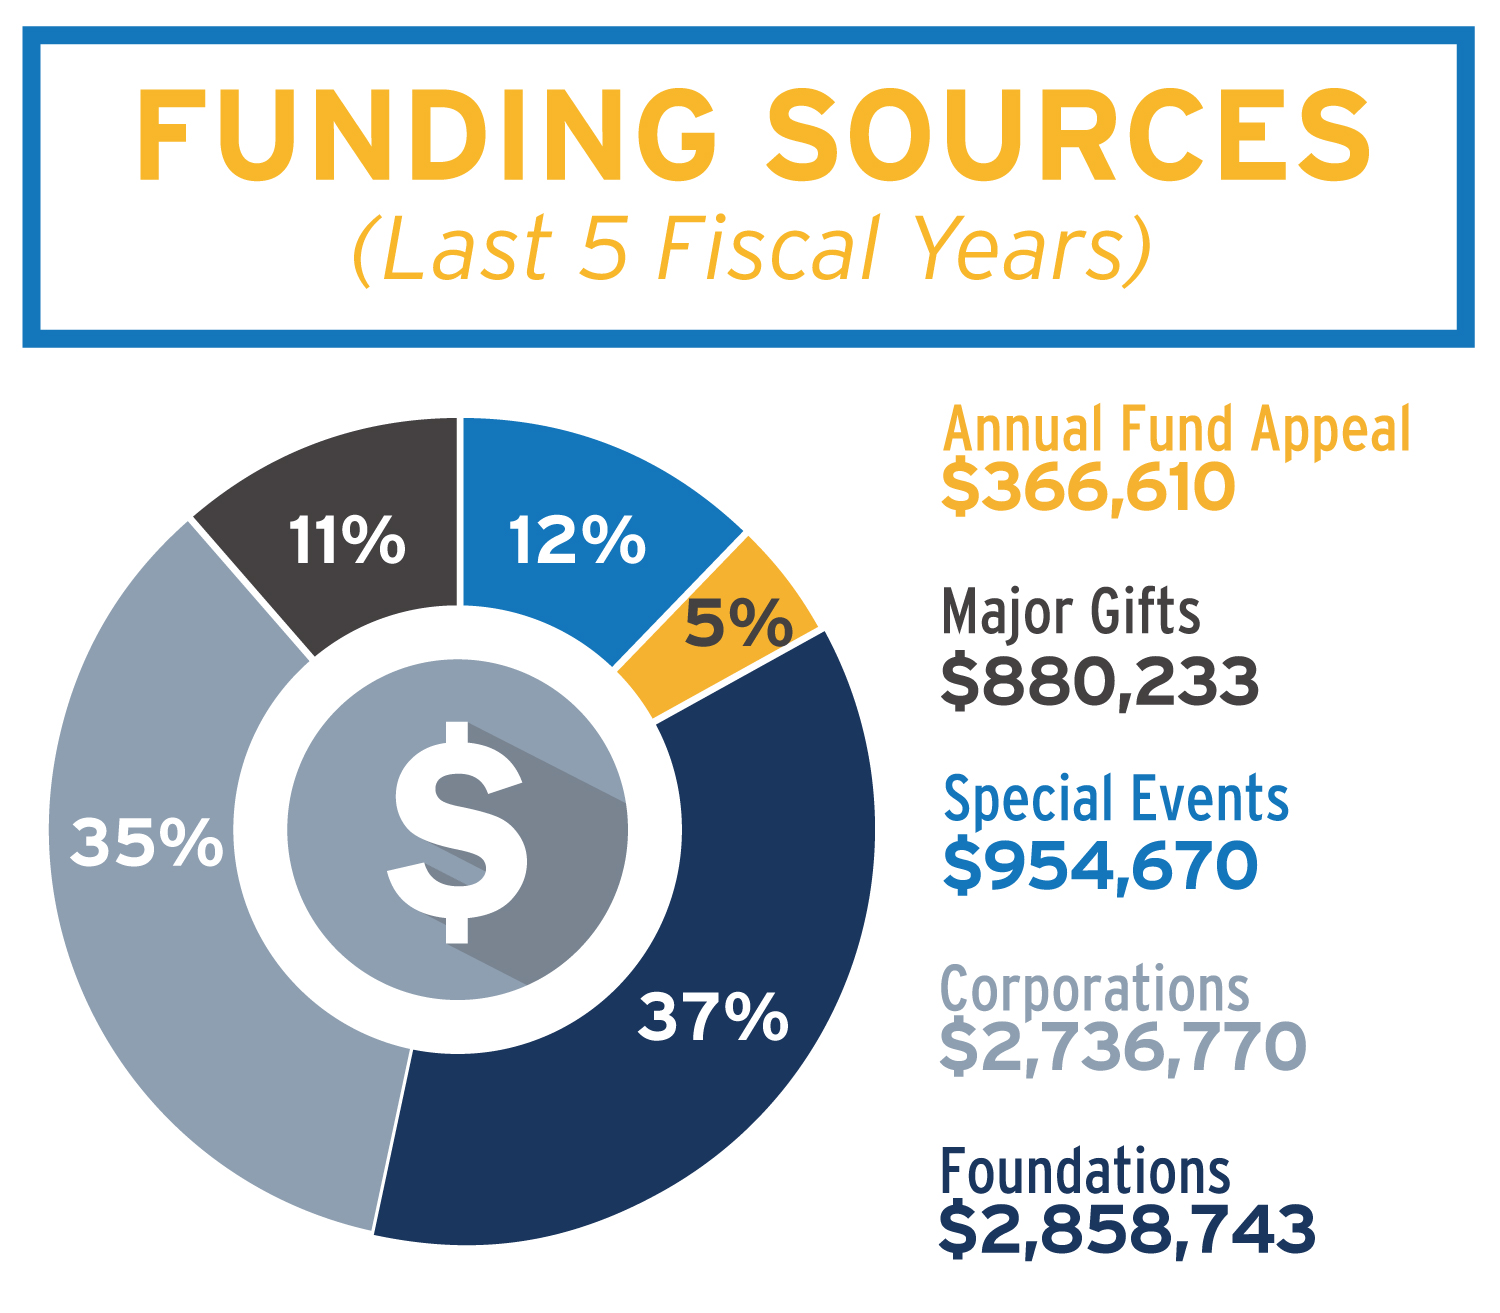 Funding Sources: major gifts, corporations, special events, annual fund appeal, foundations